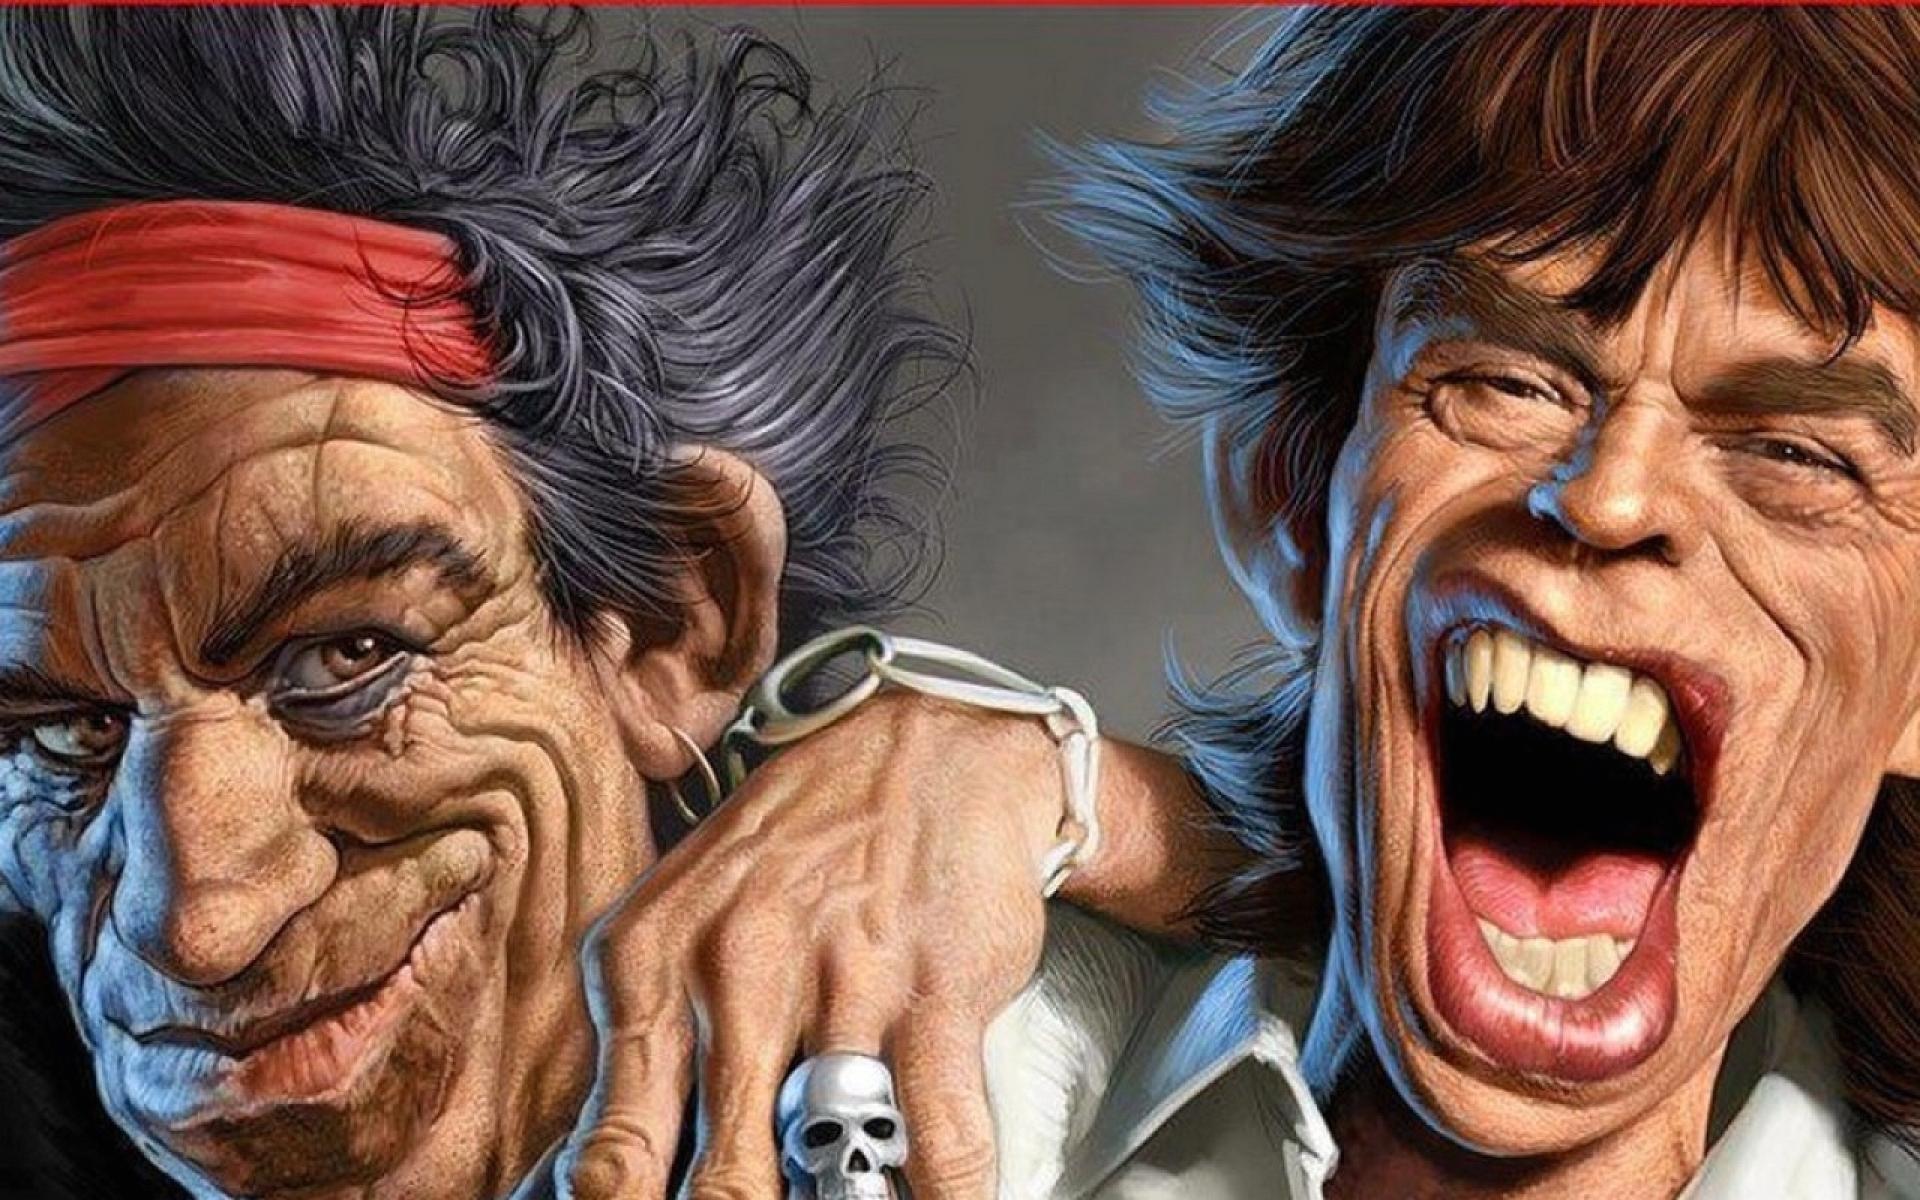 Wallpaper Funny Rolling Stones Caricature Mick Jagger x